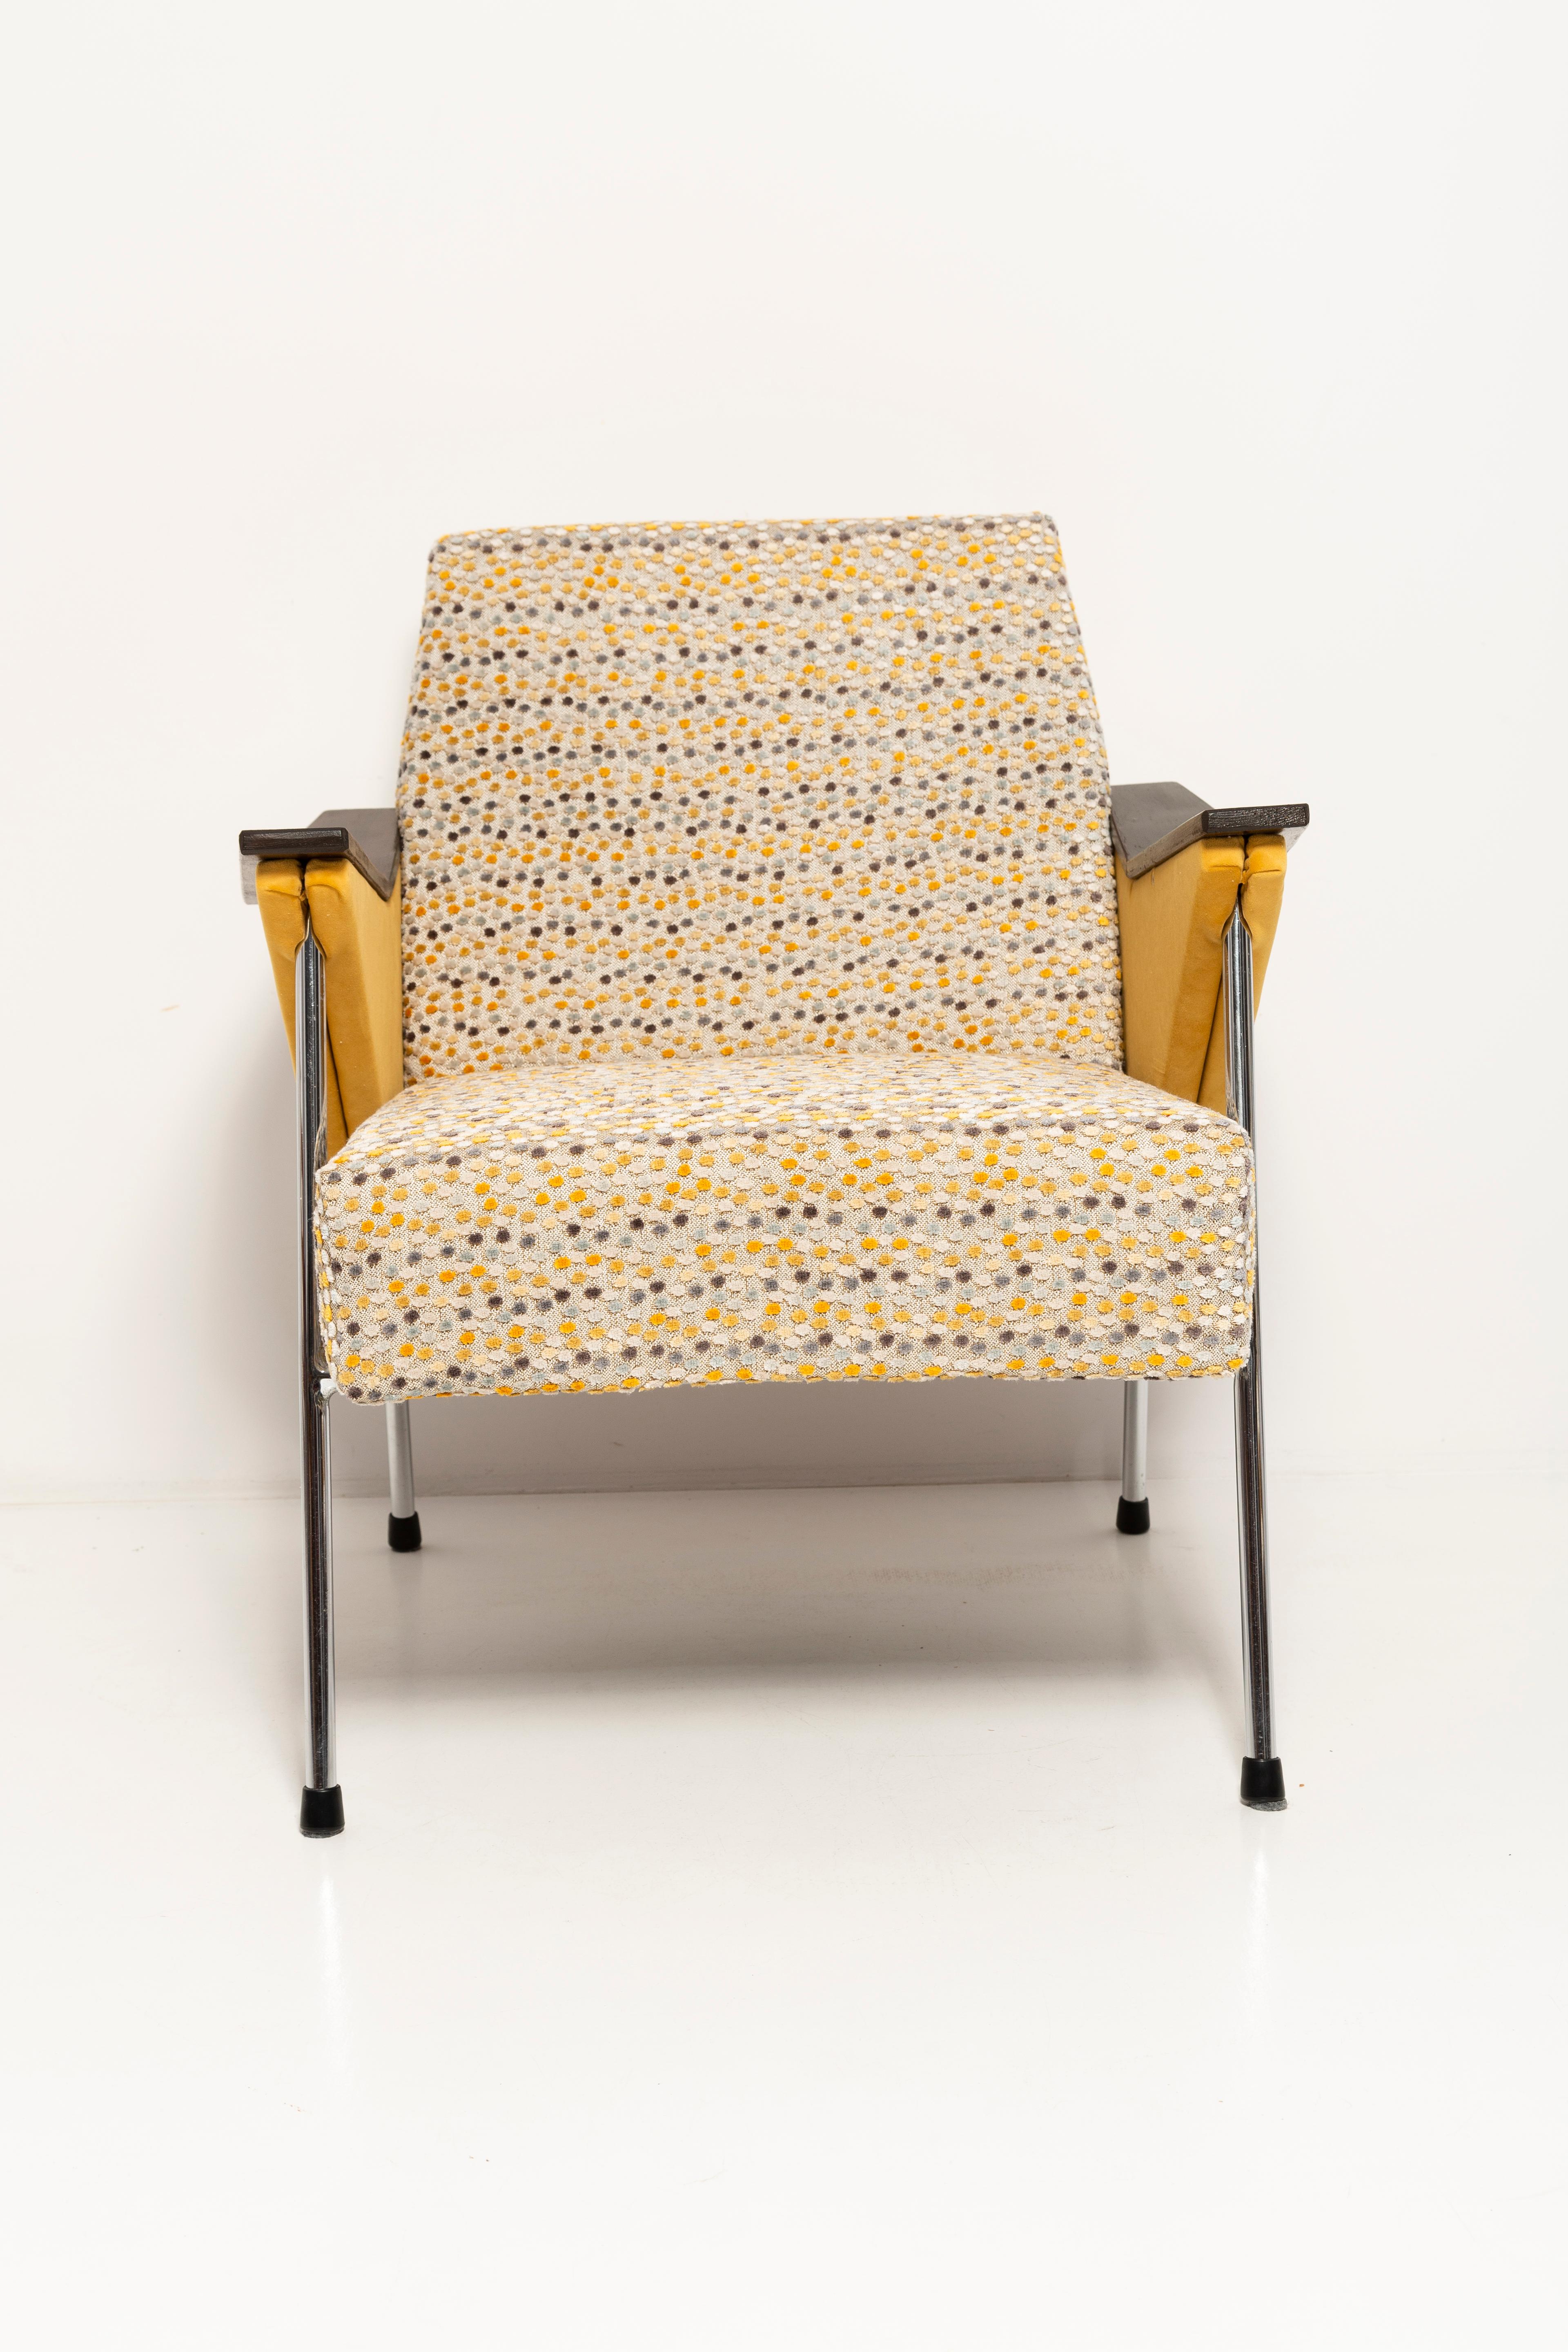 Steel Pair of Mid Century Bat Armchairs, Yellow Dots, Bauhaus Style, Poland, 1970s. For Sale